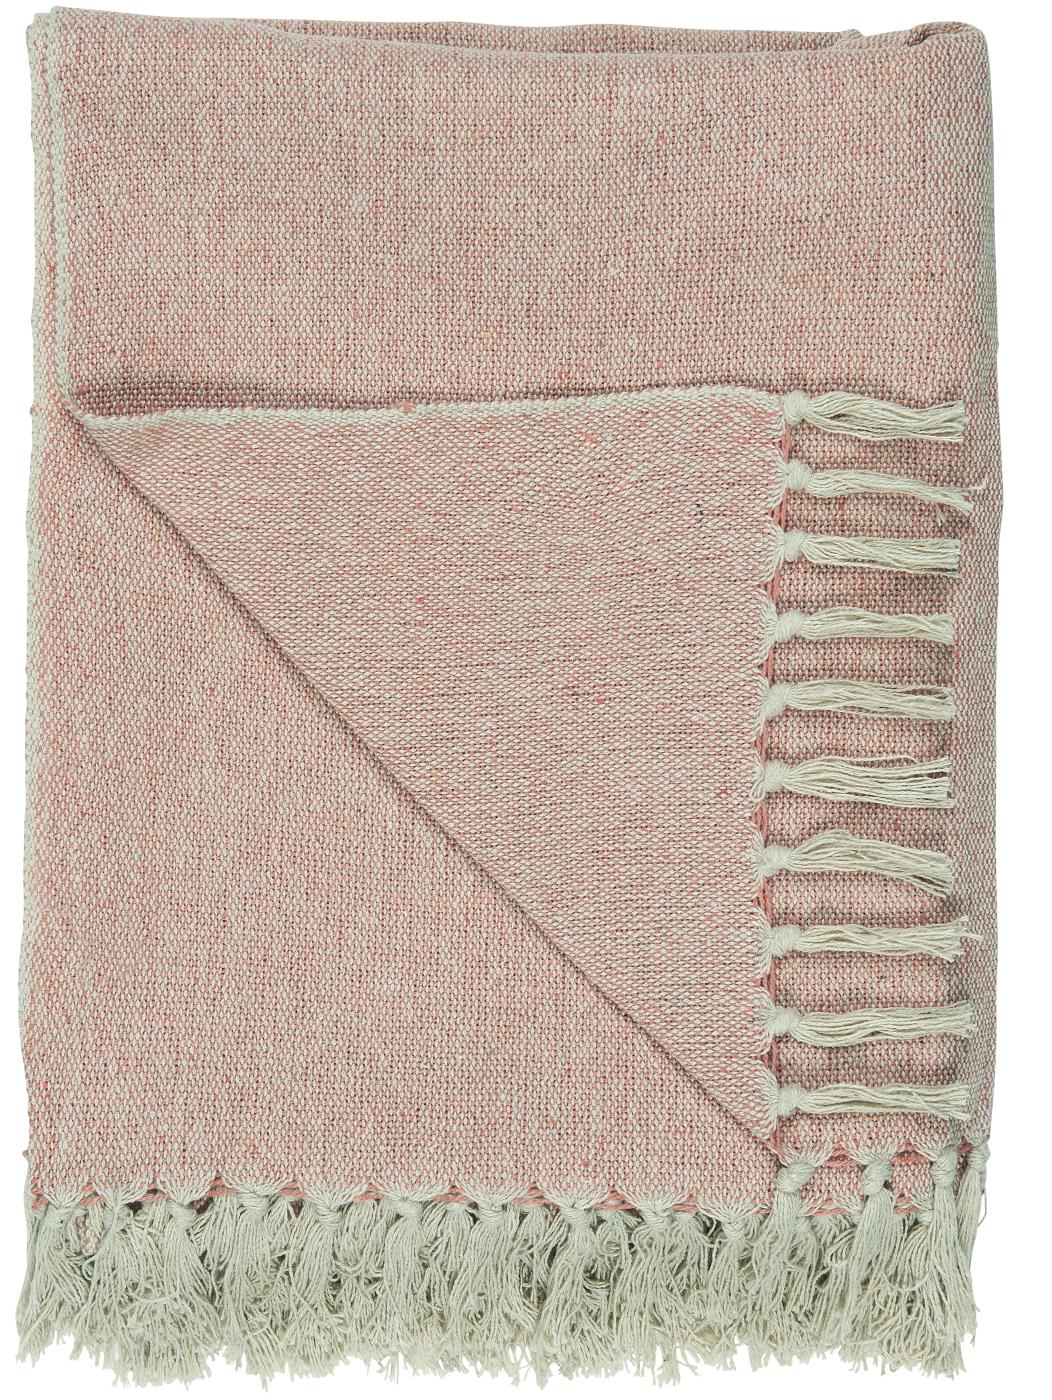 Throw with a cream and faded rose pattern